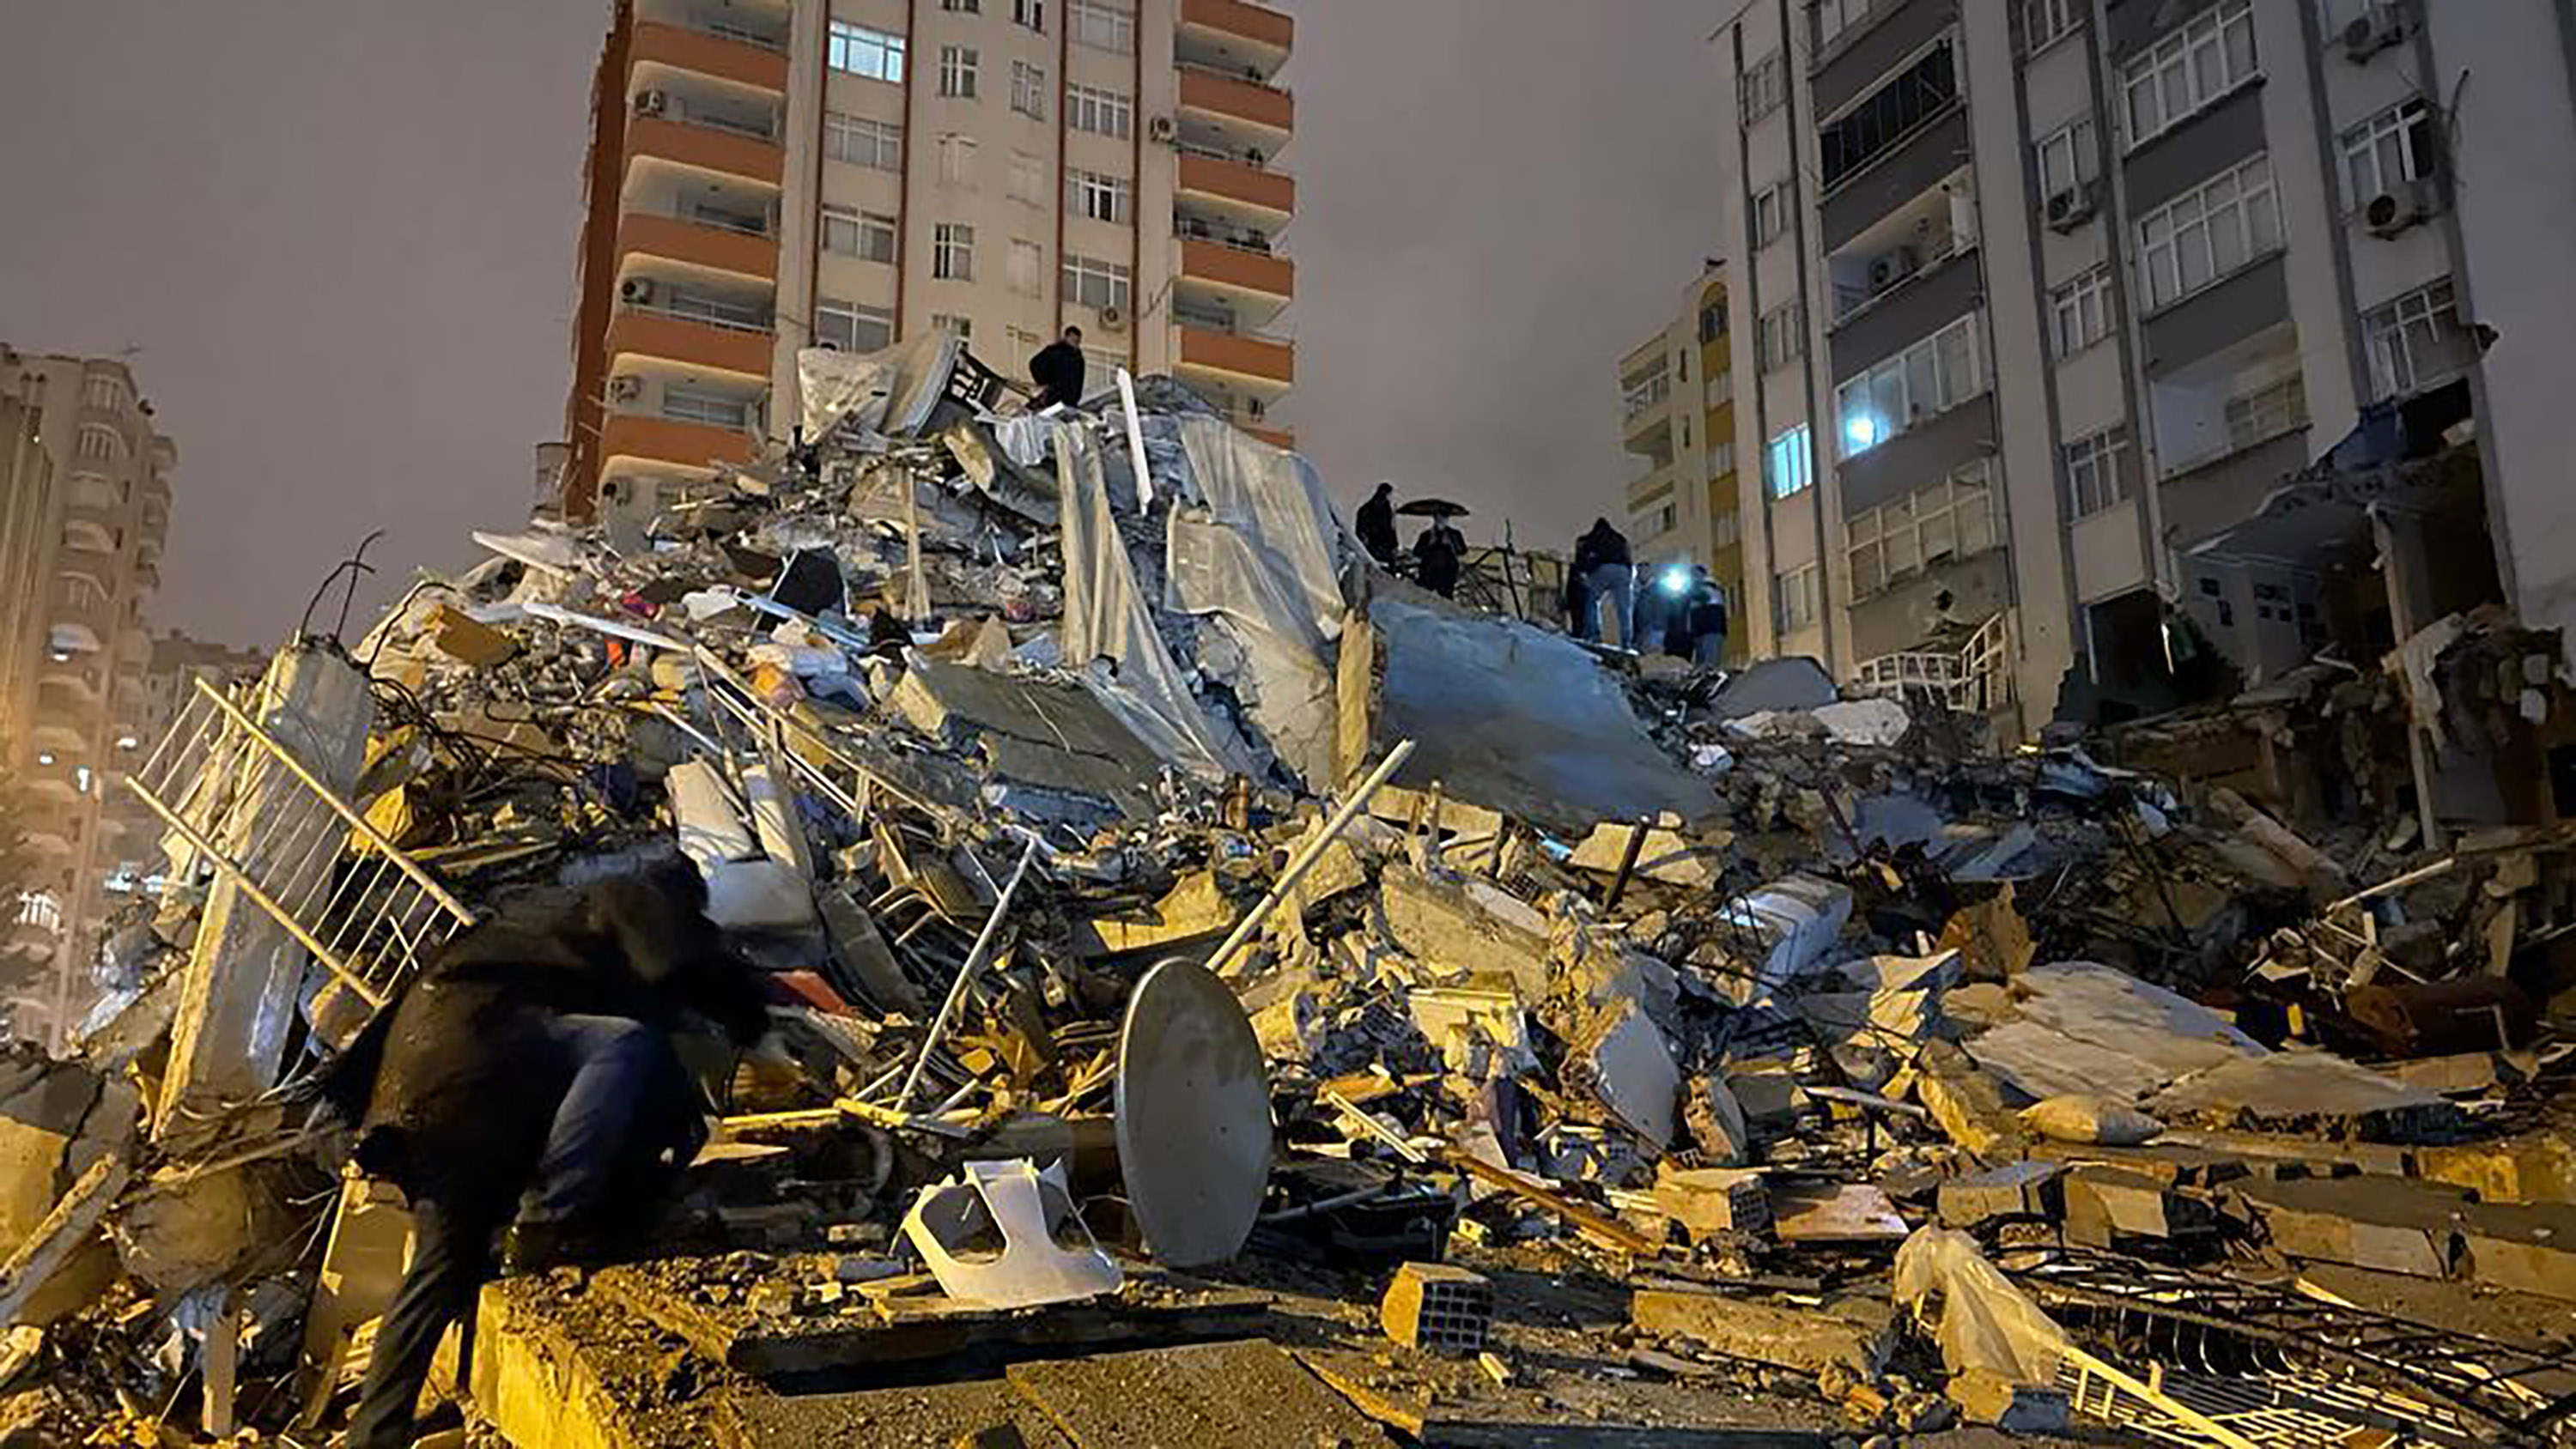 A view of the destroyed building after earthquakes jolts Turkey's provinces, on February 6, in Adana, Turkey.